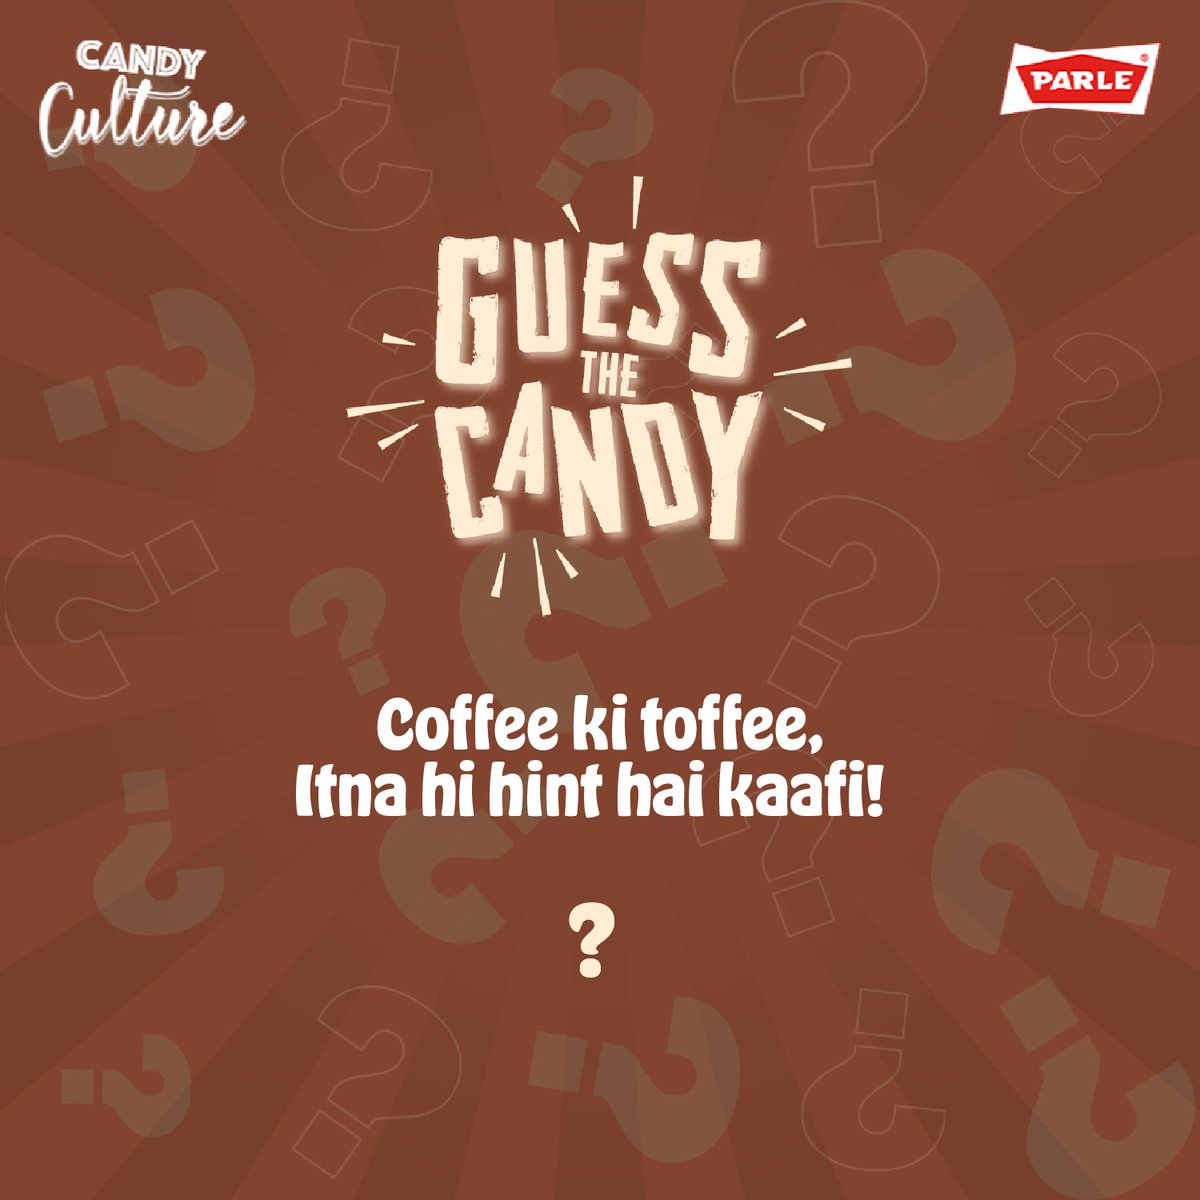 Coffee ka toffee Itna hi hint hai kaafi We know the answer but do you? Let us know in the comments below to stand a chance to win a prize. Follow these simple rules to make sure you win: 1. Like the post 2. Follow our page 3. Use #ParleCandyCulture and #GuessTheCandy 4. Tag 5